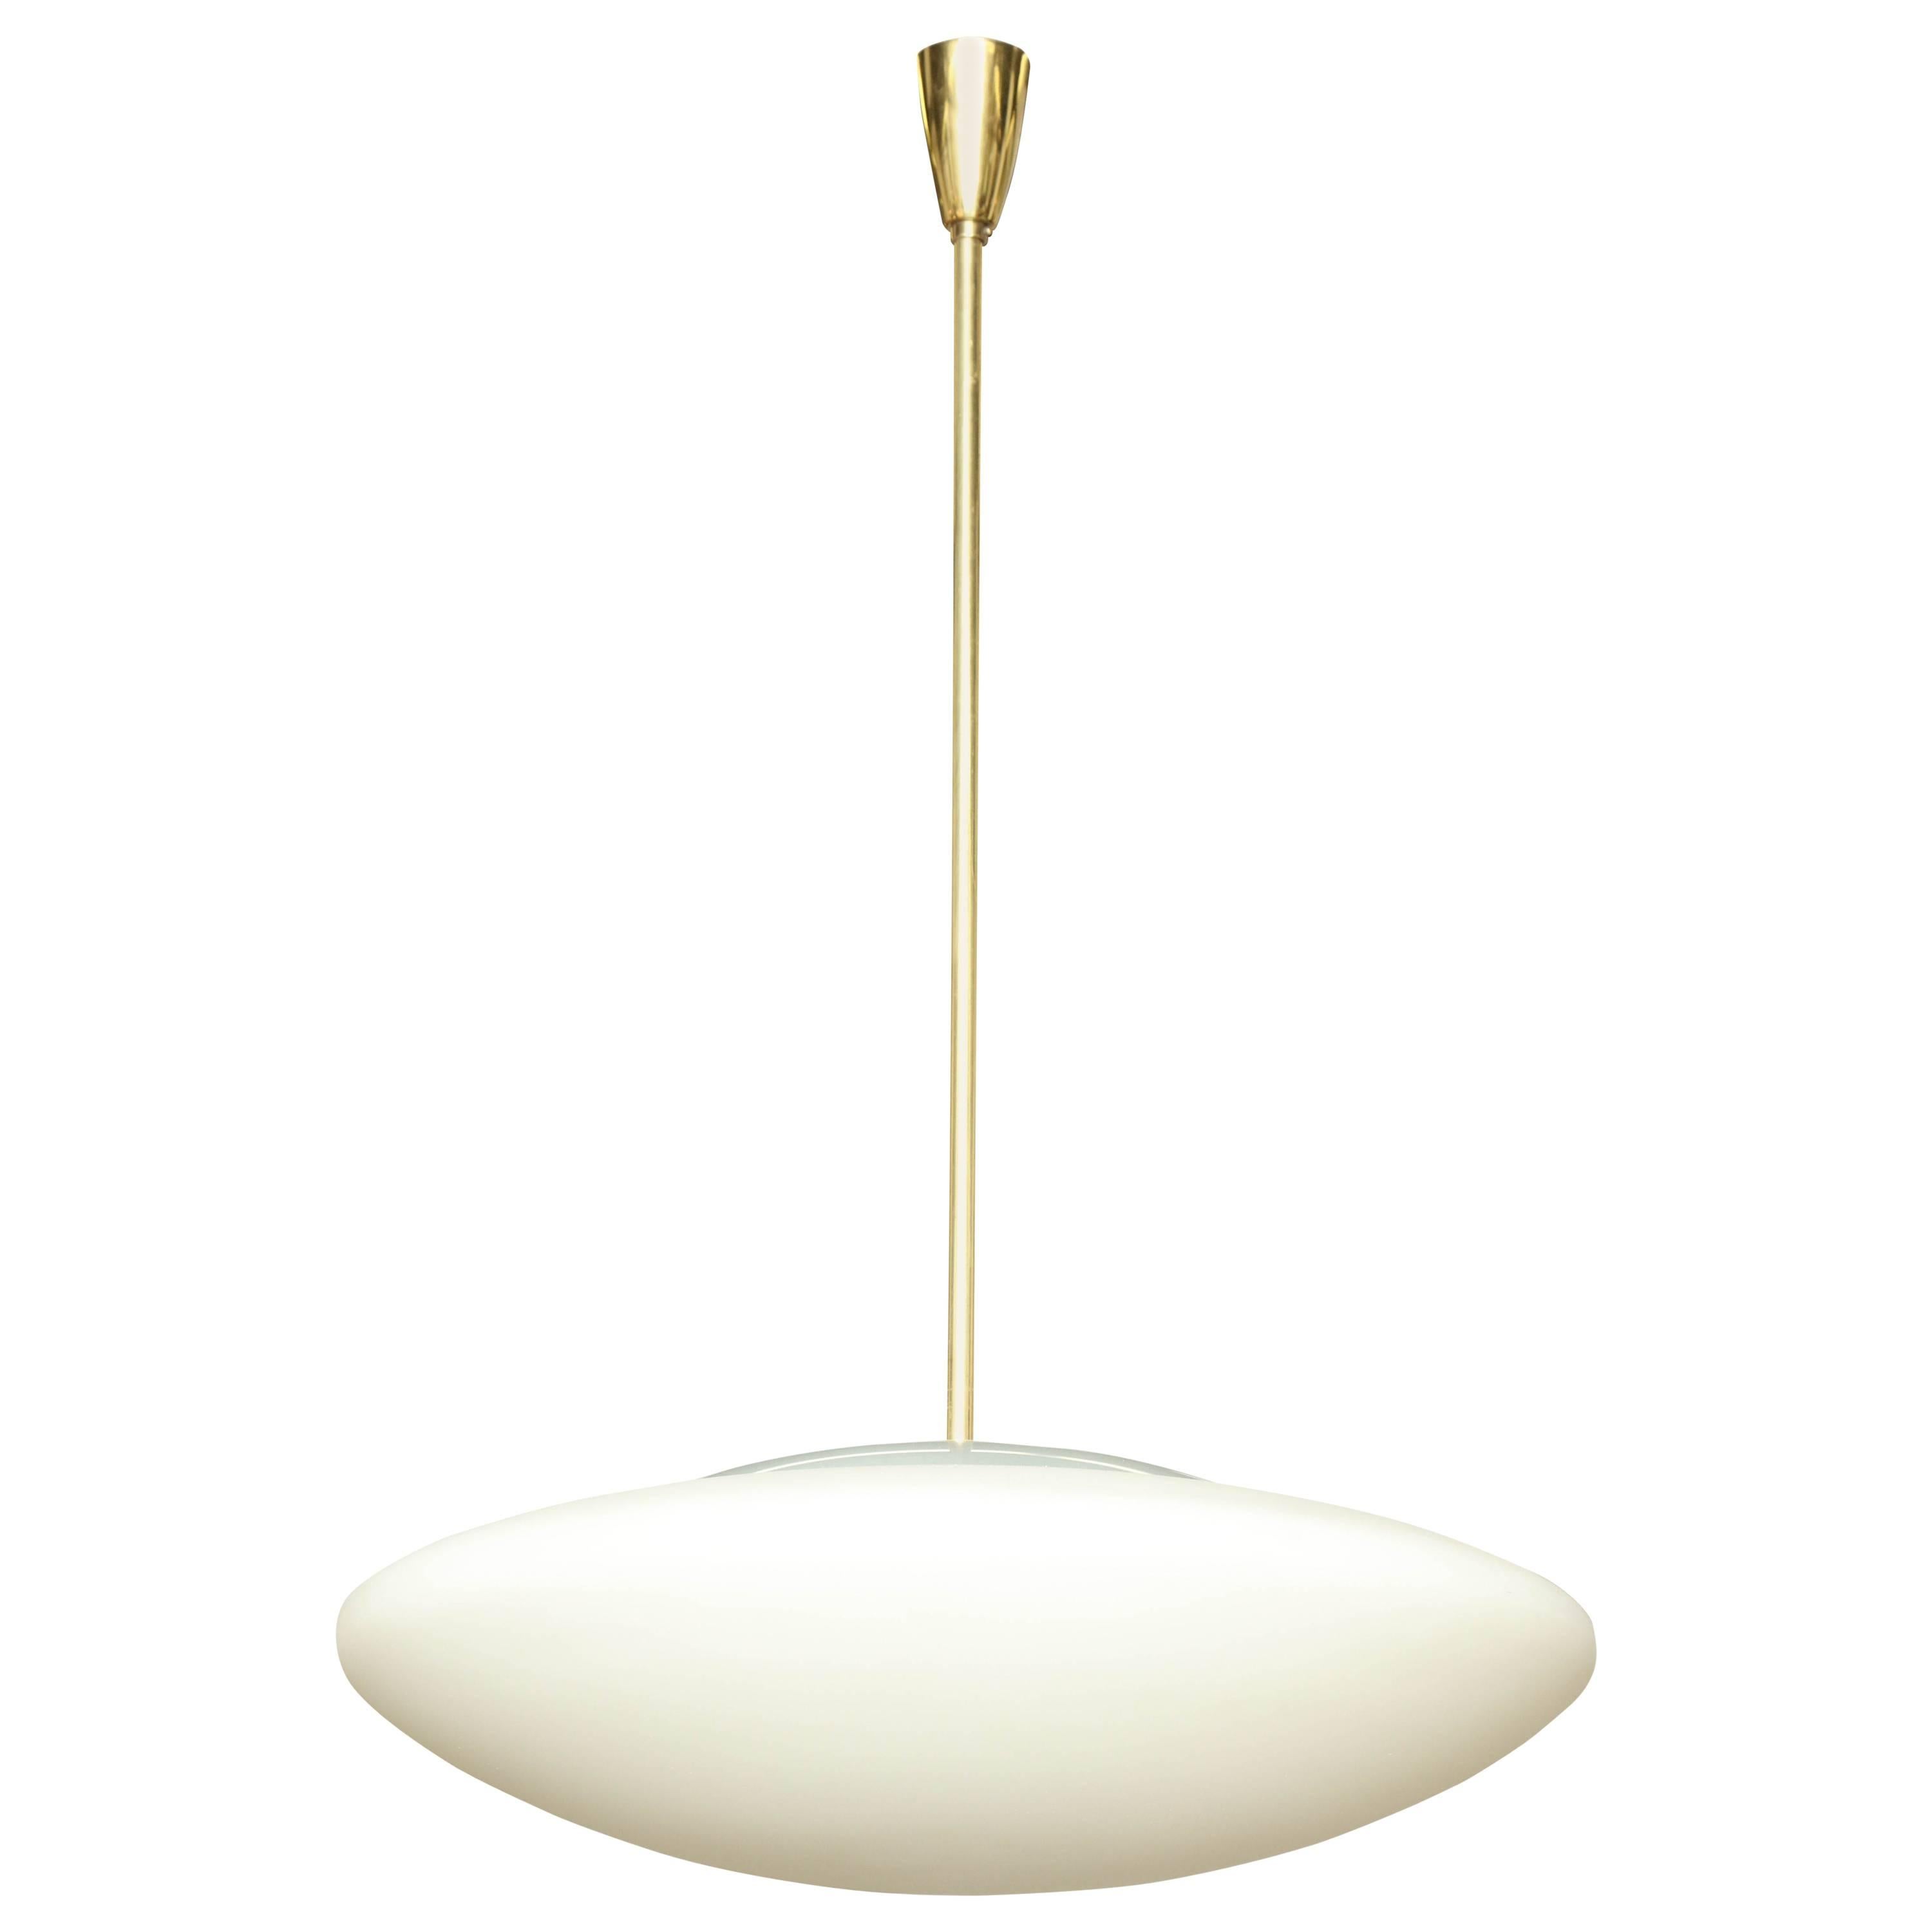 Fontana Arte pendent light made in Italy 1950 For Sale